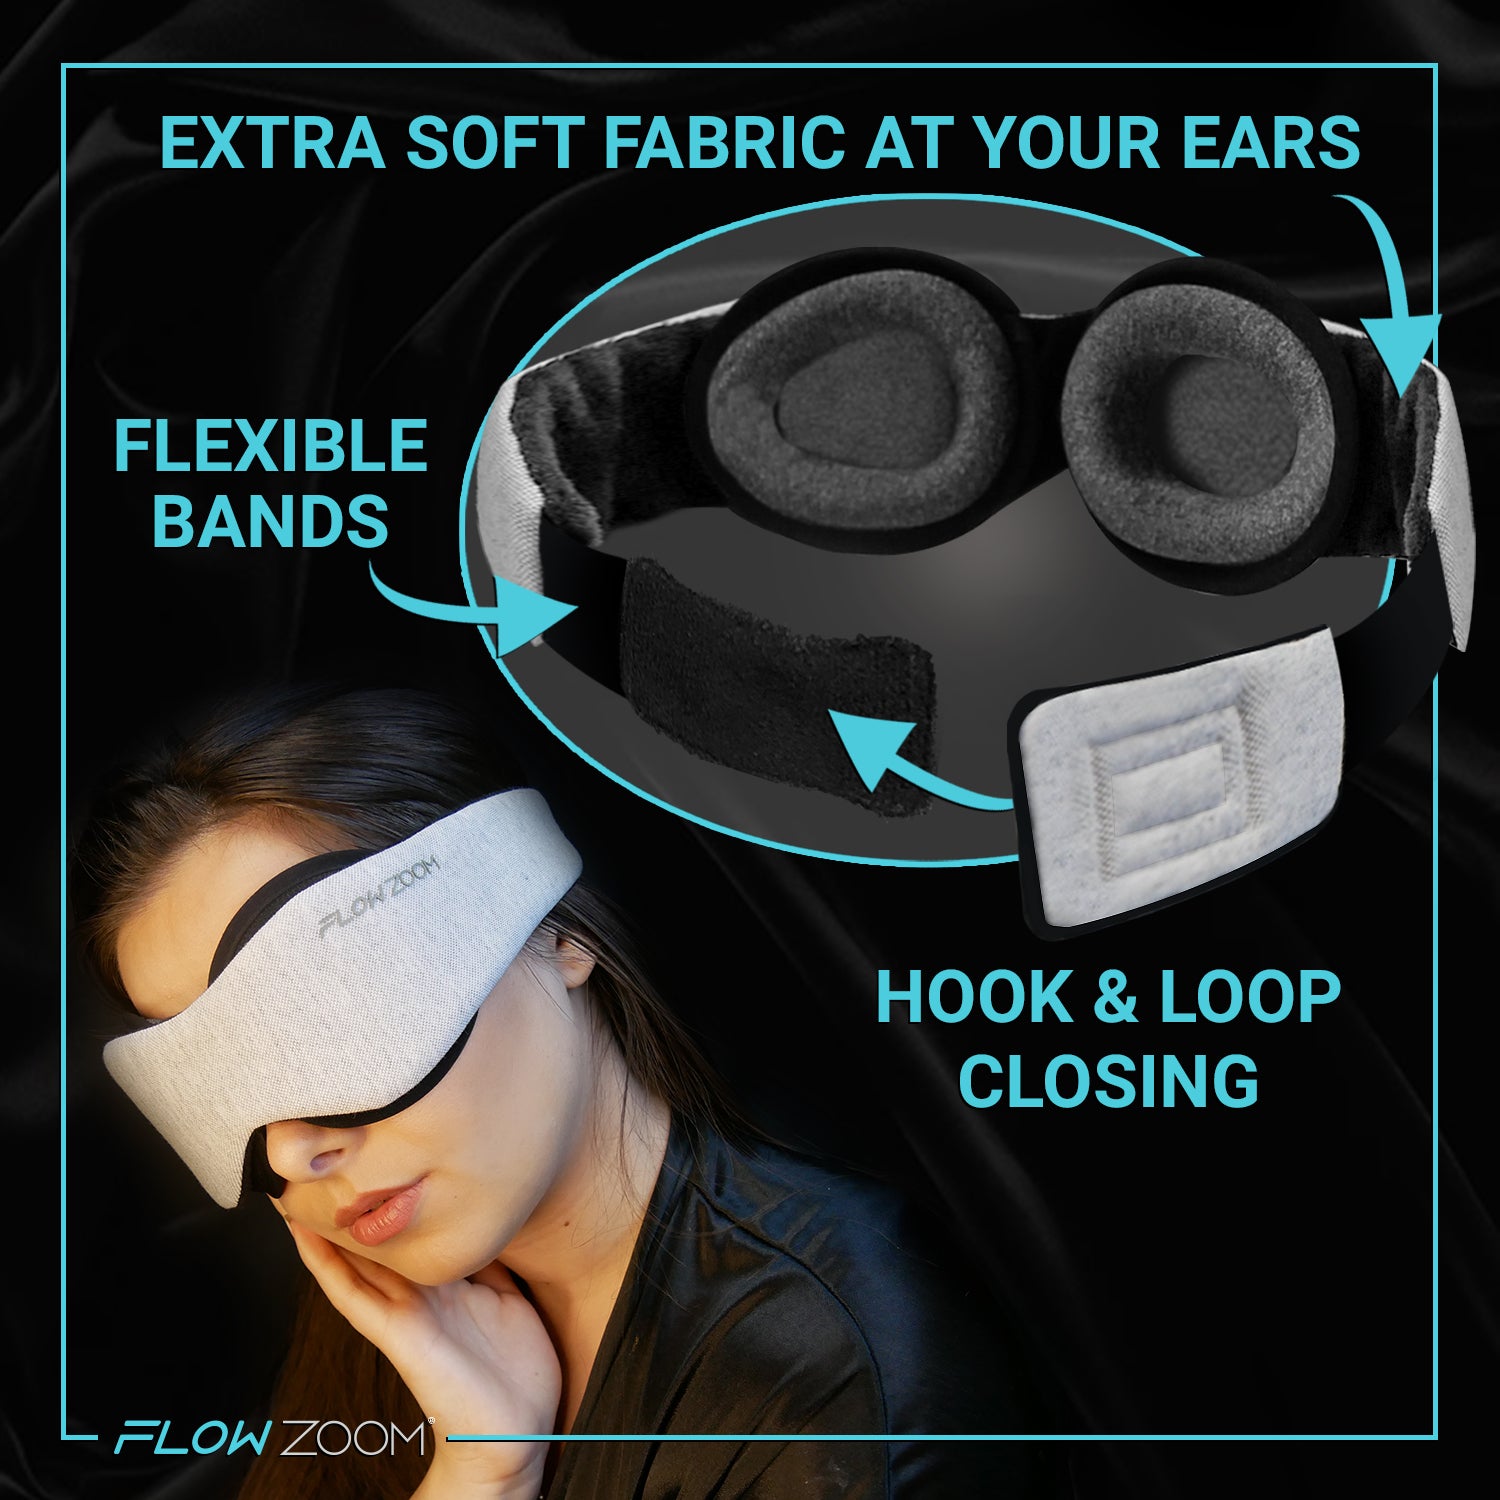 Adjustable Sleep Mask that fits any face shape and size